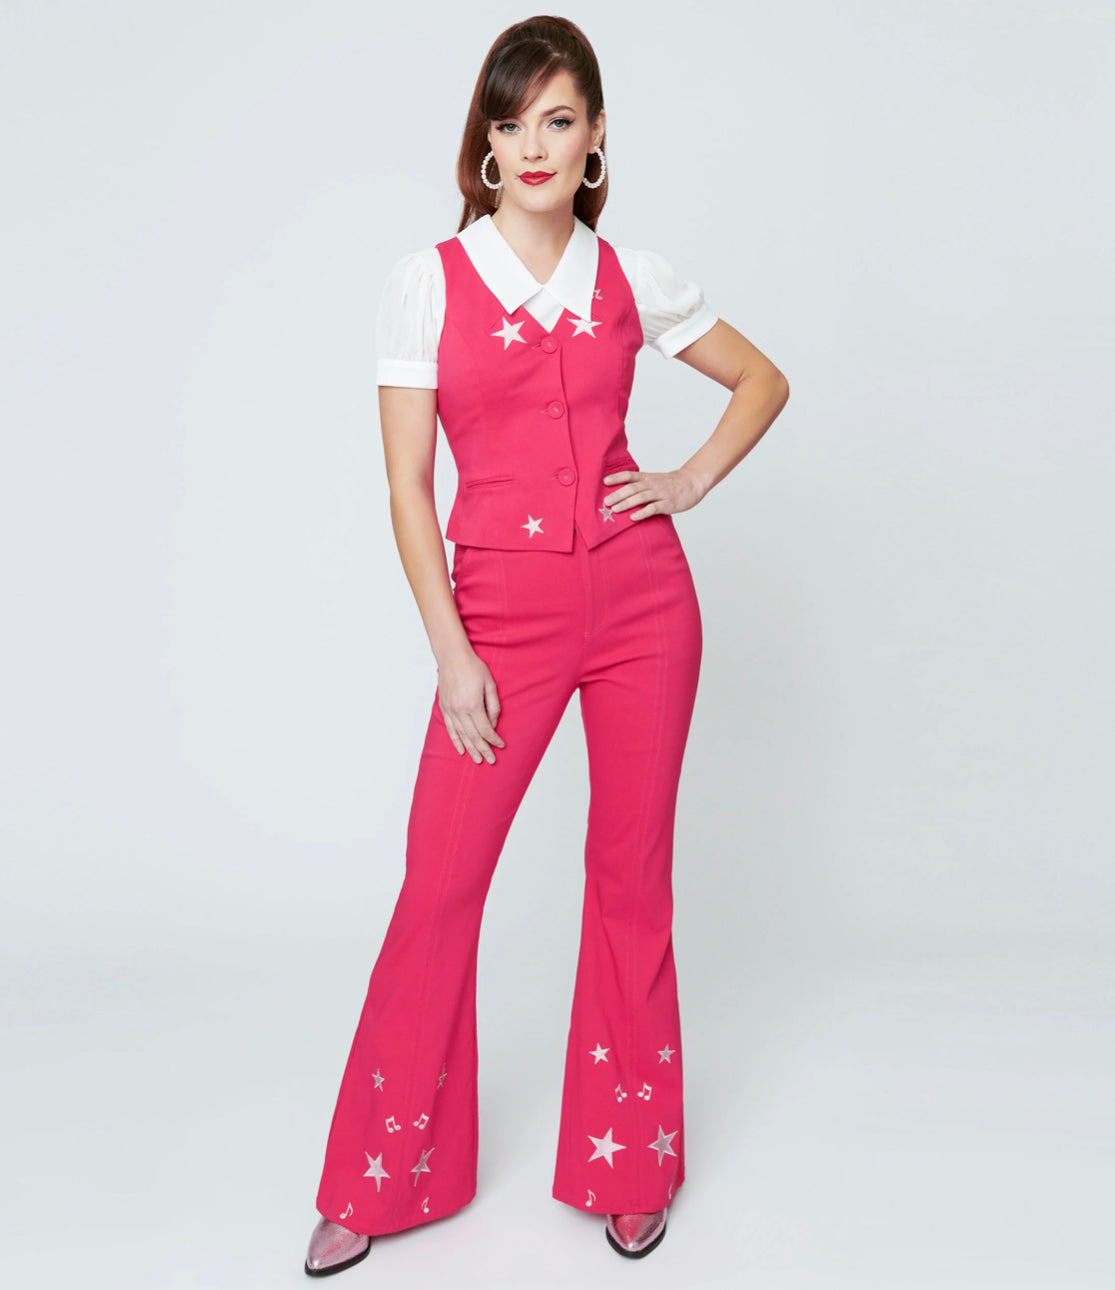 These sensational 1970s style bell bottoms are crafted in a bright pink bengaline stretch with contrast seaming and glittery stars on the flare legs. The banded high waist is cinched with a front zipper and button, outfitted with side and back pockets for modern function!